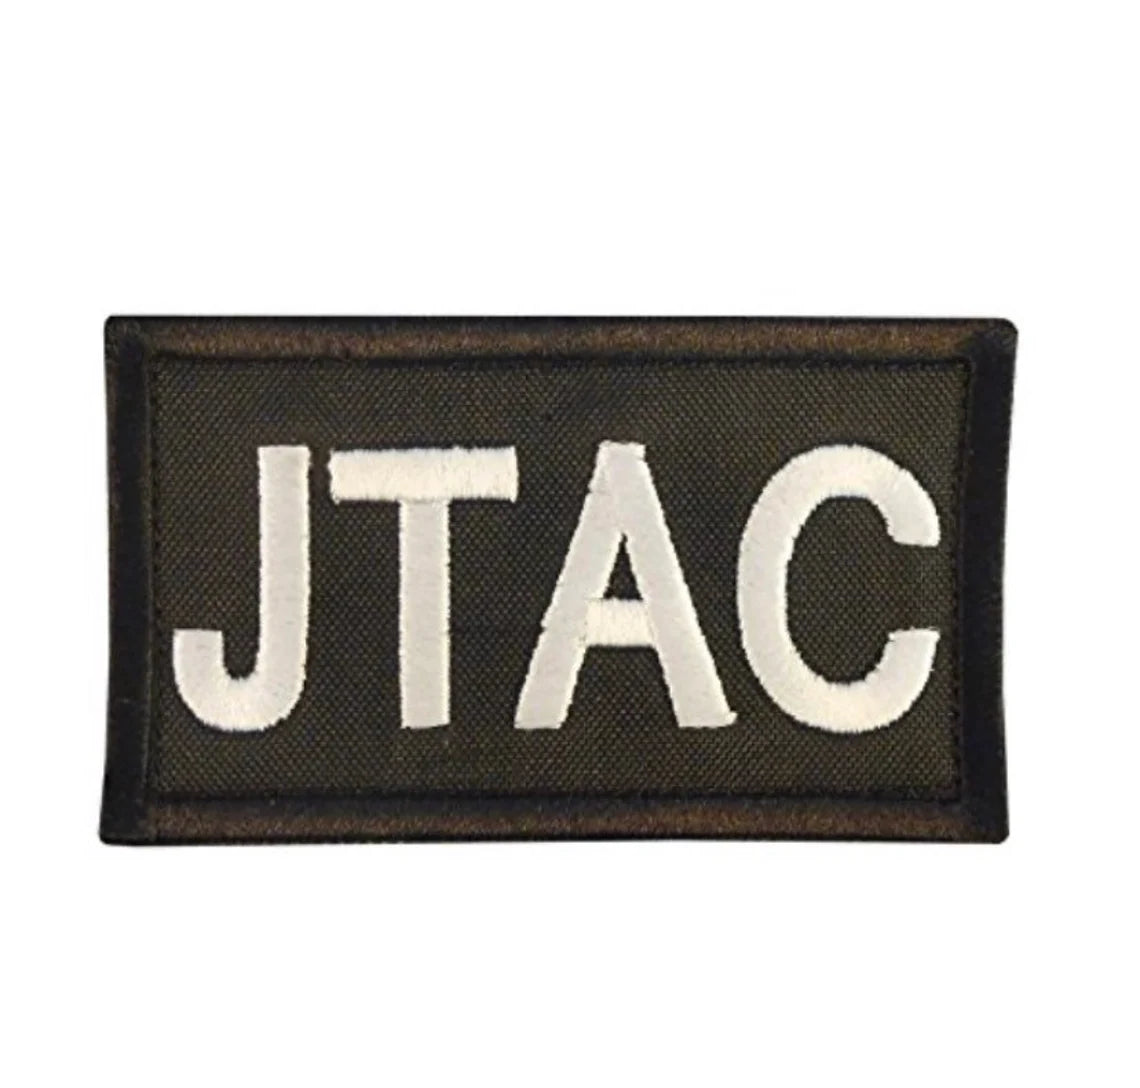 JTAC Patch Joint Terminal Attack Controller Patches (3.5 Inch) Velcro Badge